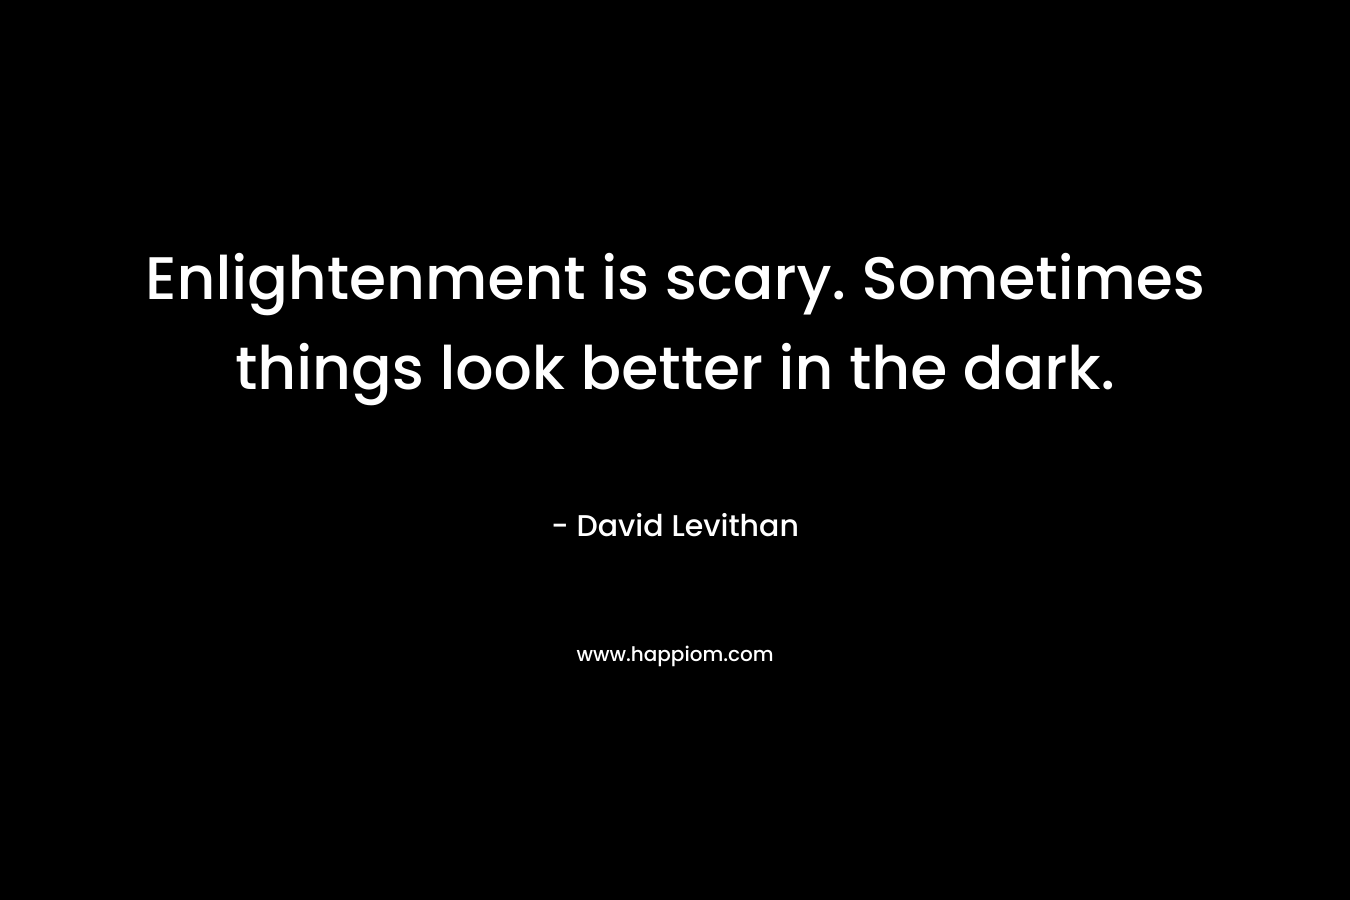 Enlightenment is scary. Sometimes things look better in the dark. – David Levithan